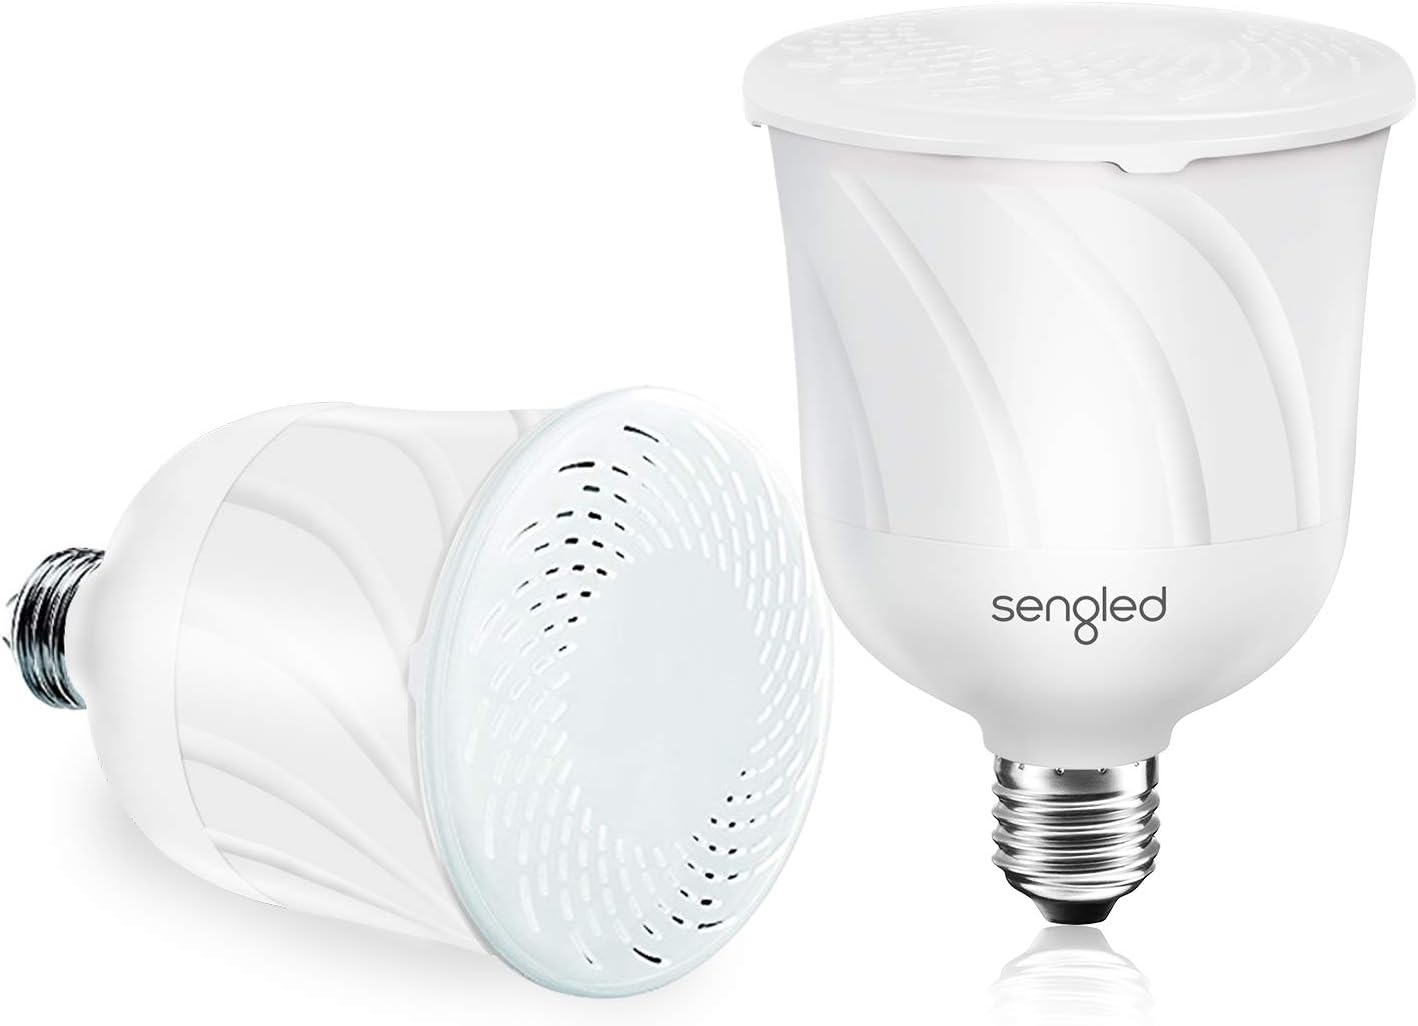 Sengled Pulse LED Smart Bulb with JBL Bluetooth Speaker - A Review of Brilliant Sound and Illumination